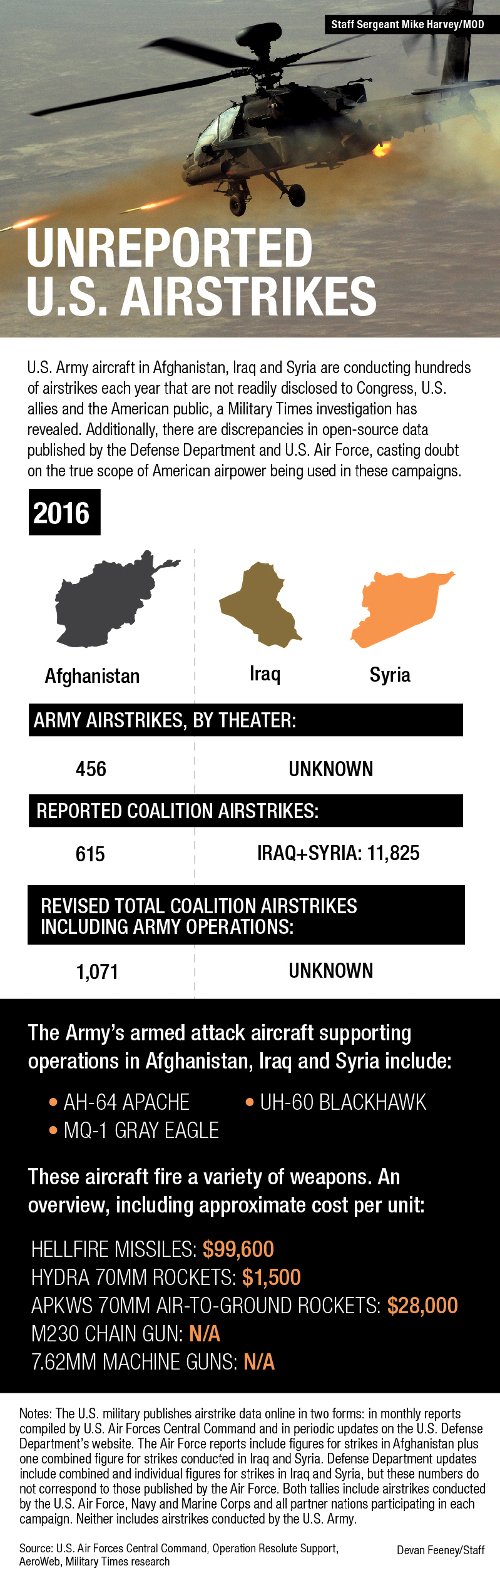 airstrikesgraphic500 1 - U.S. Military Stats on Deadly Airstrikes Are Wrong. Thousands Have Gone Unreported